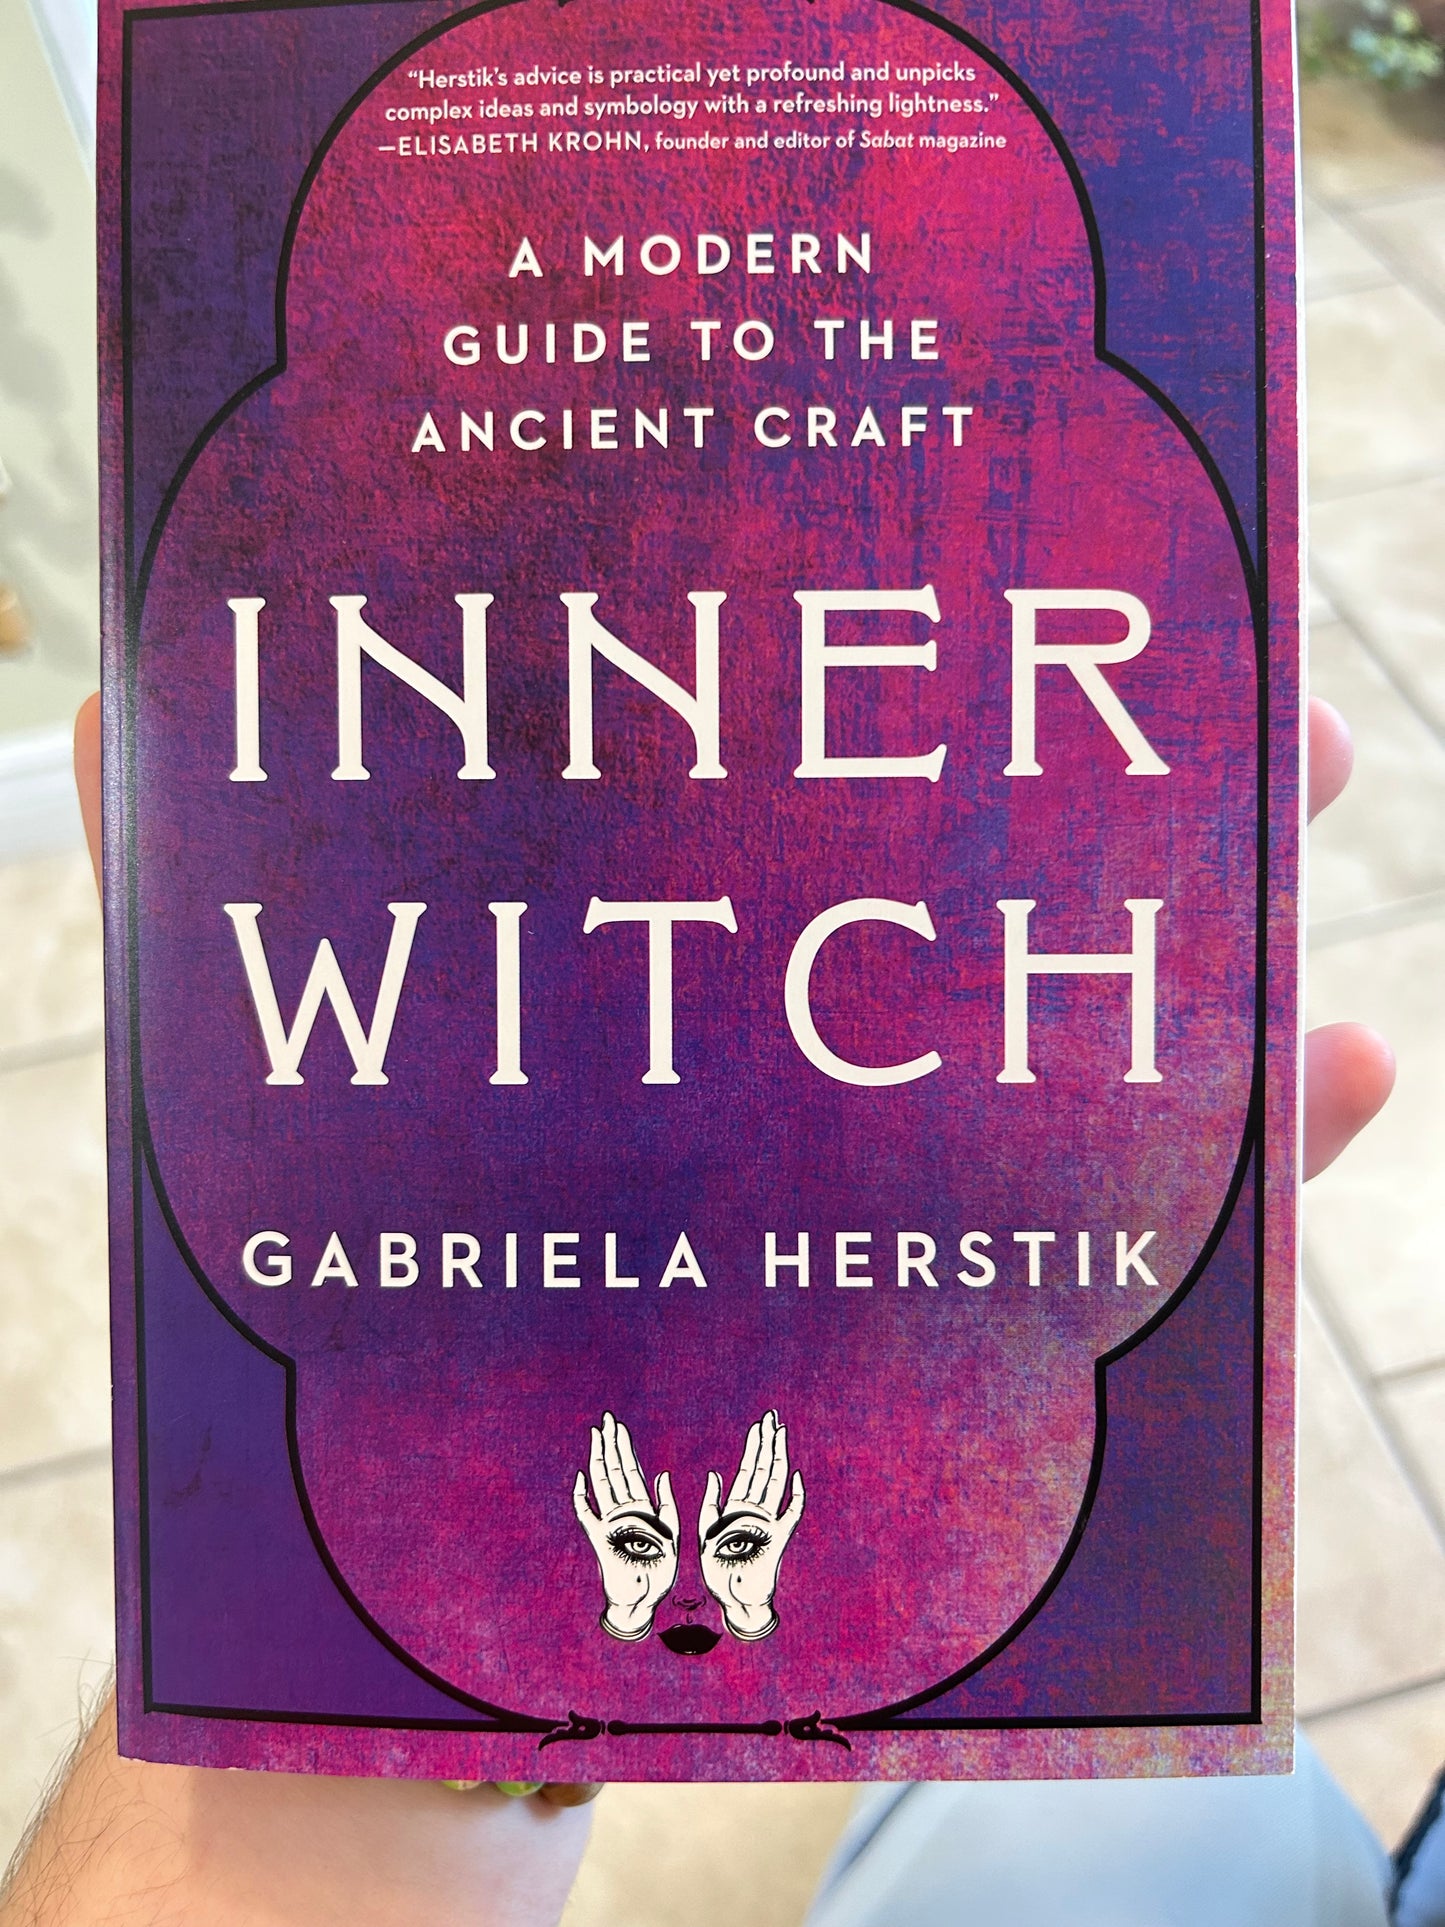 A modern guide to the ancient craft Inner witch by Gabriela Herstik